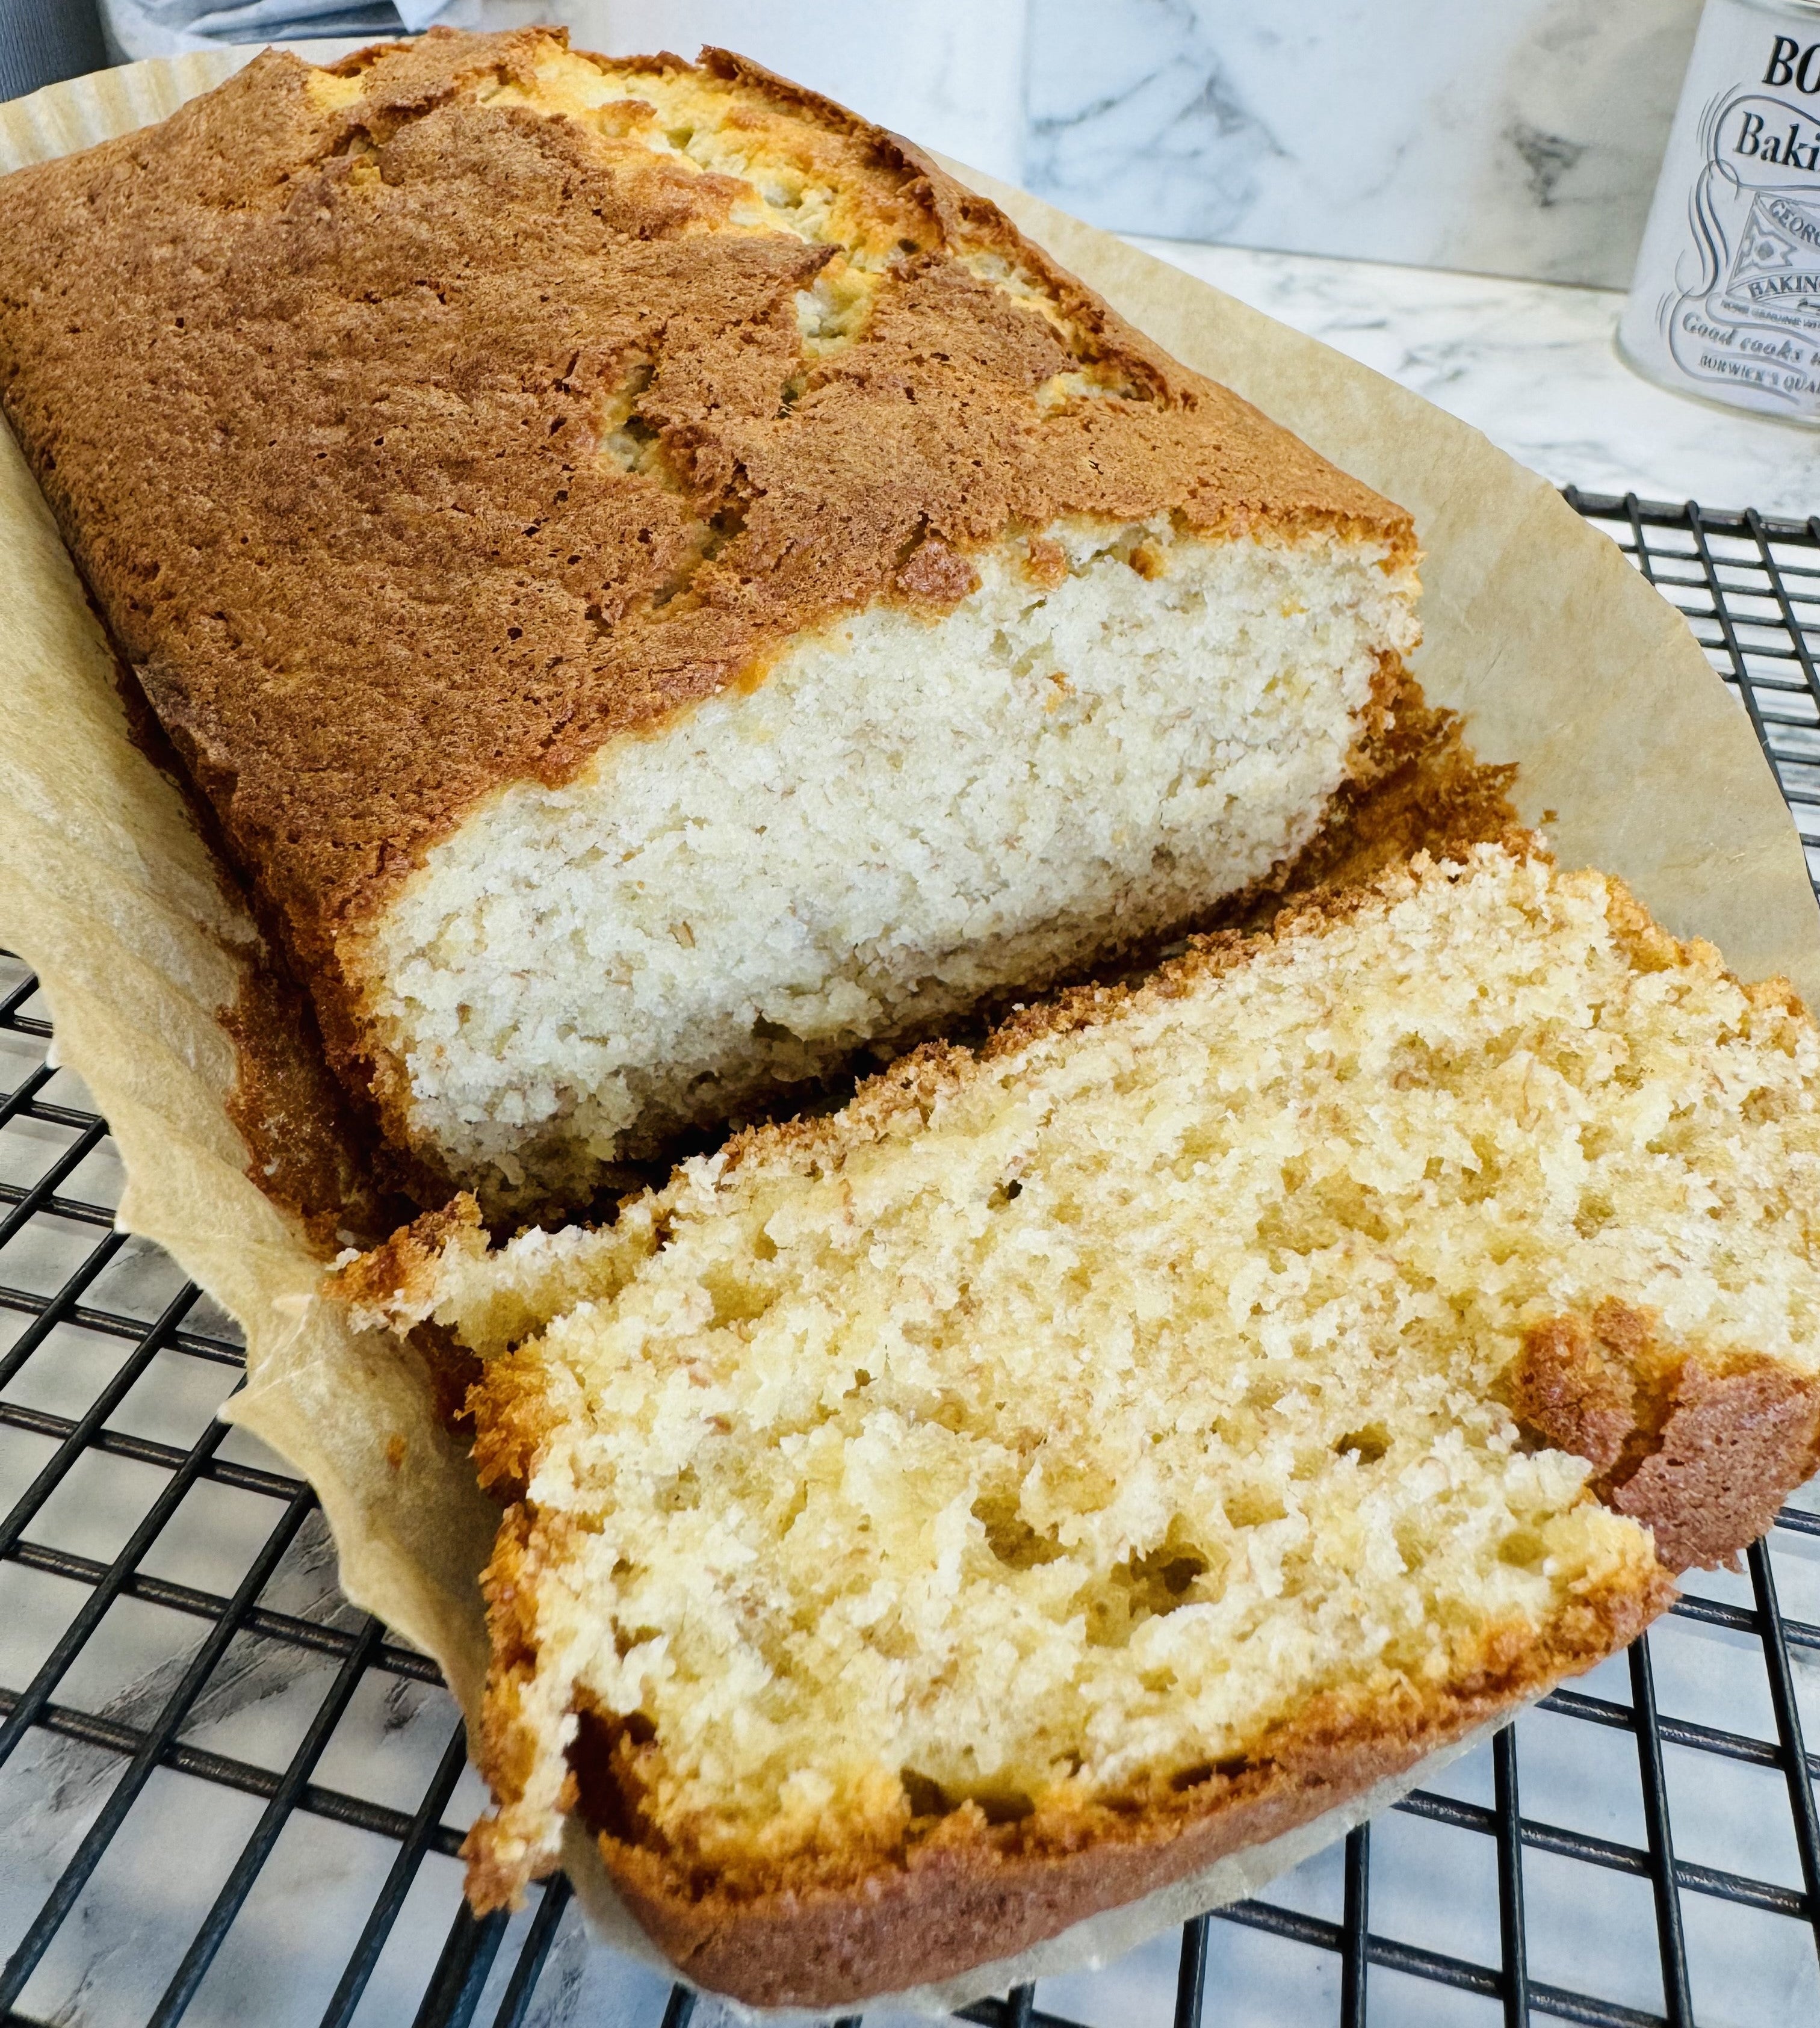 Close-up of Mary Berry's banana bread showing the loaf's fluffy interior and crumbs